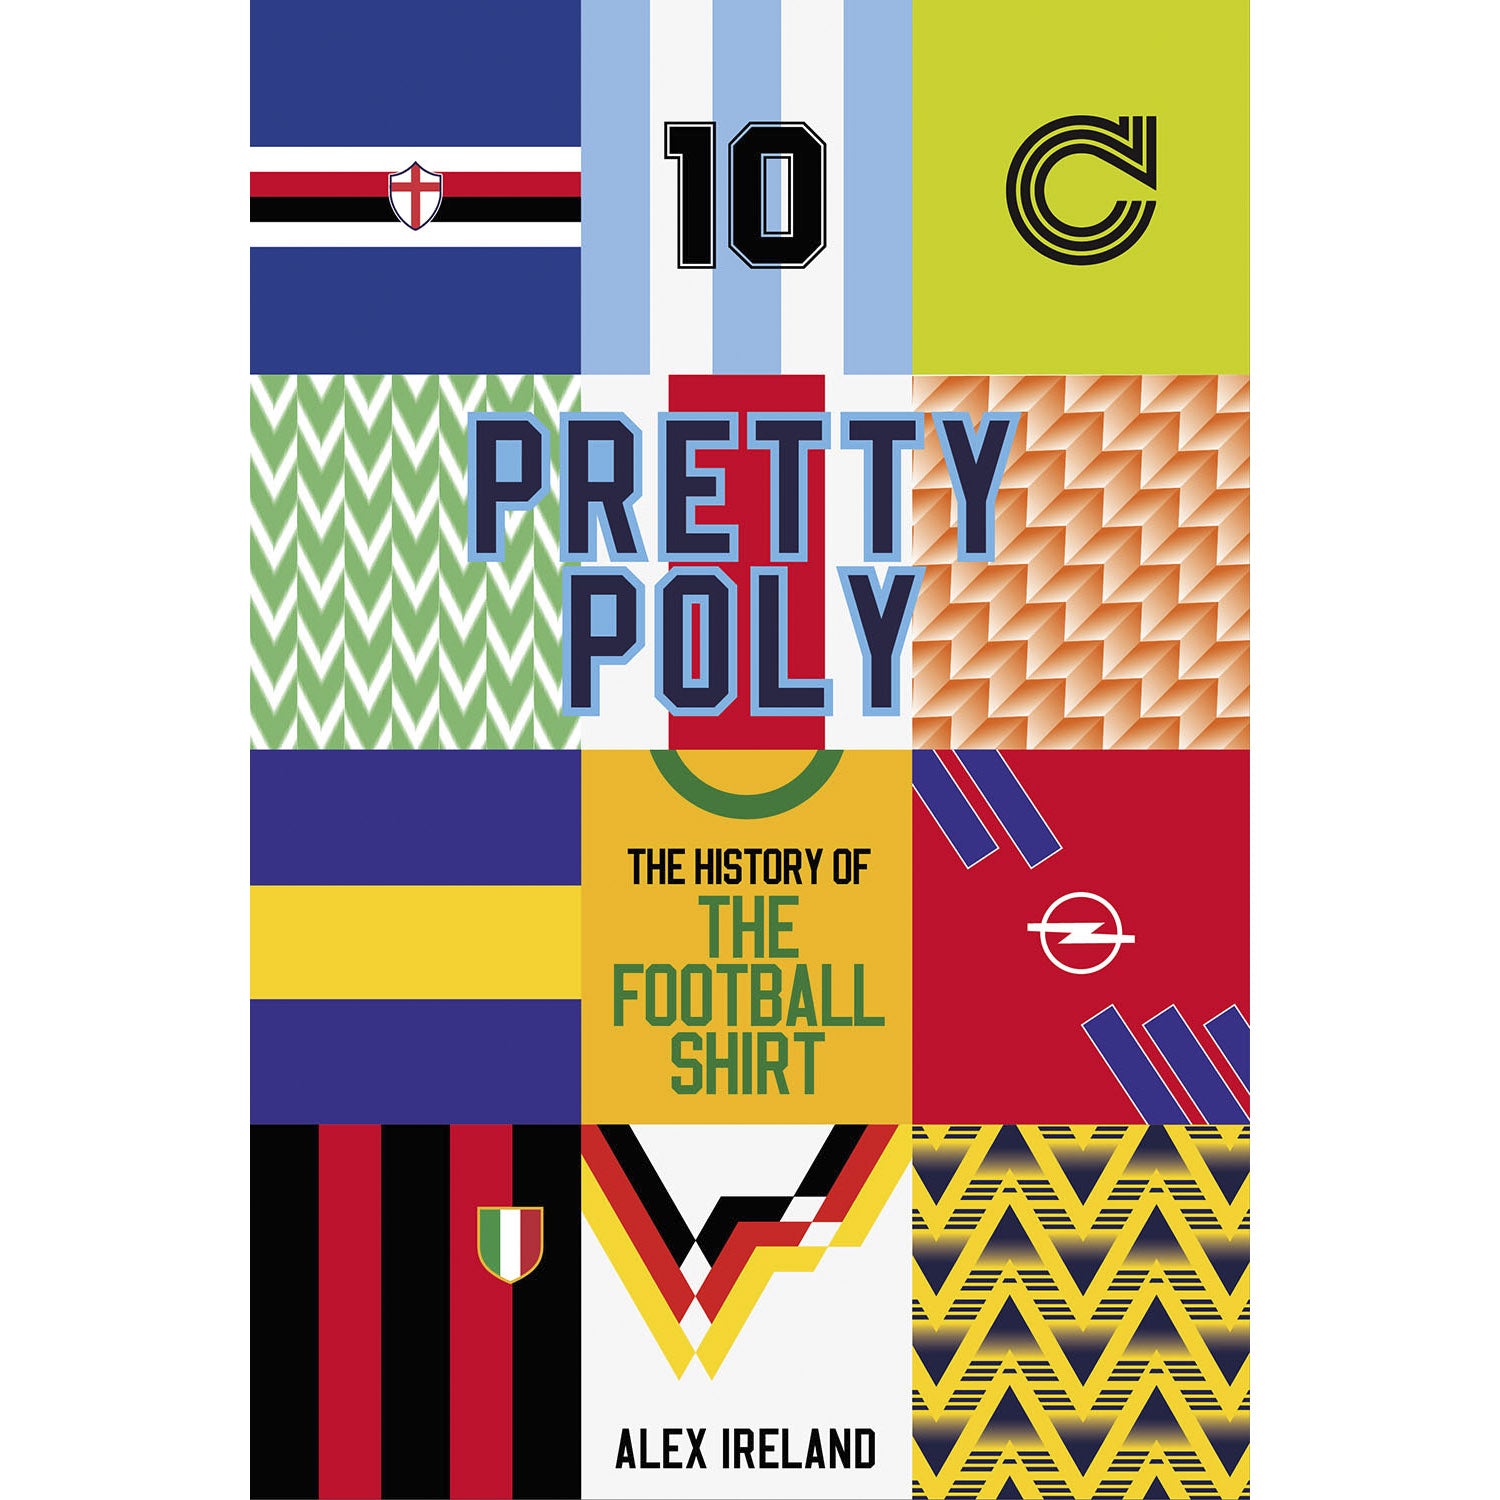 Pretty Poly – The History of the Football Shirt